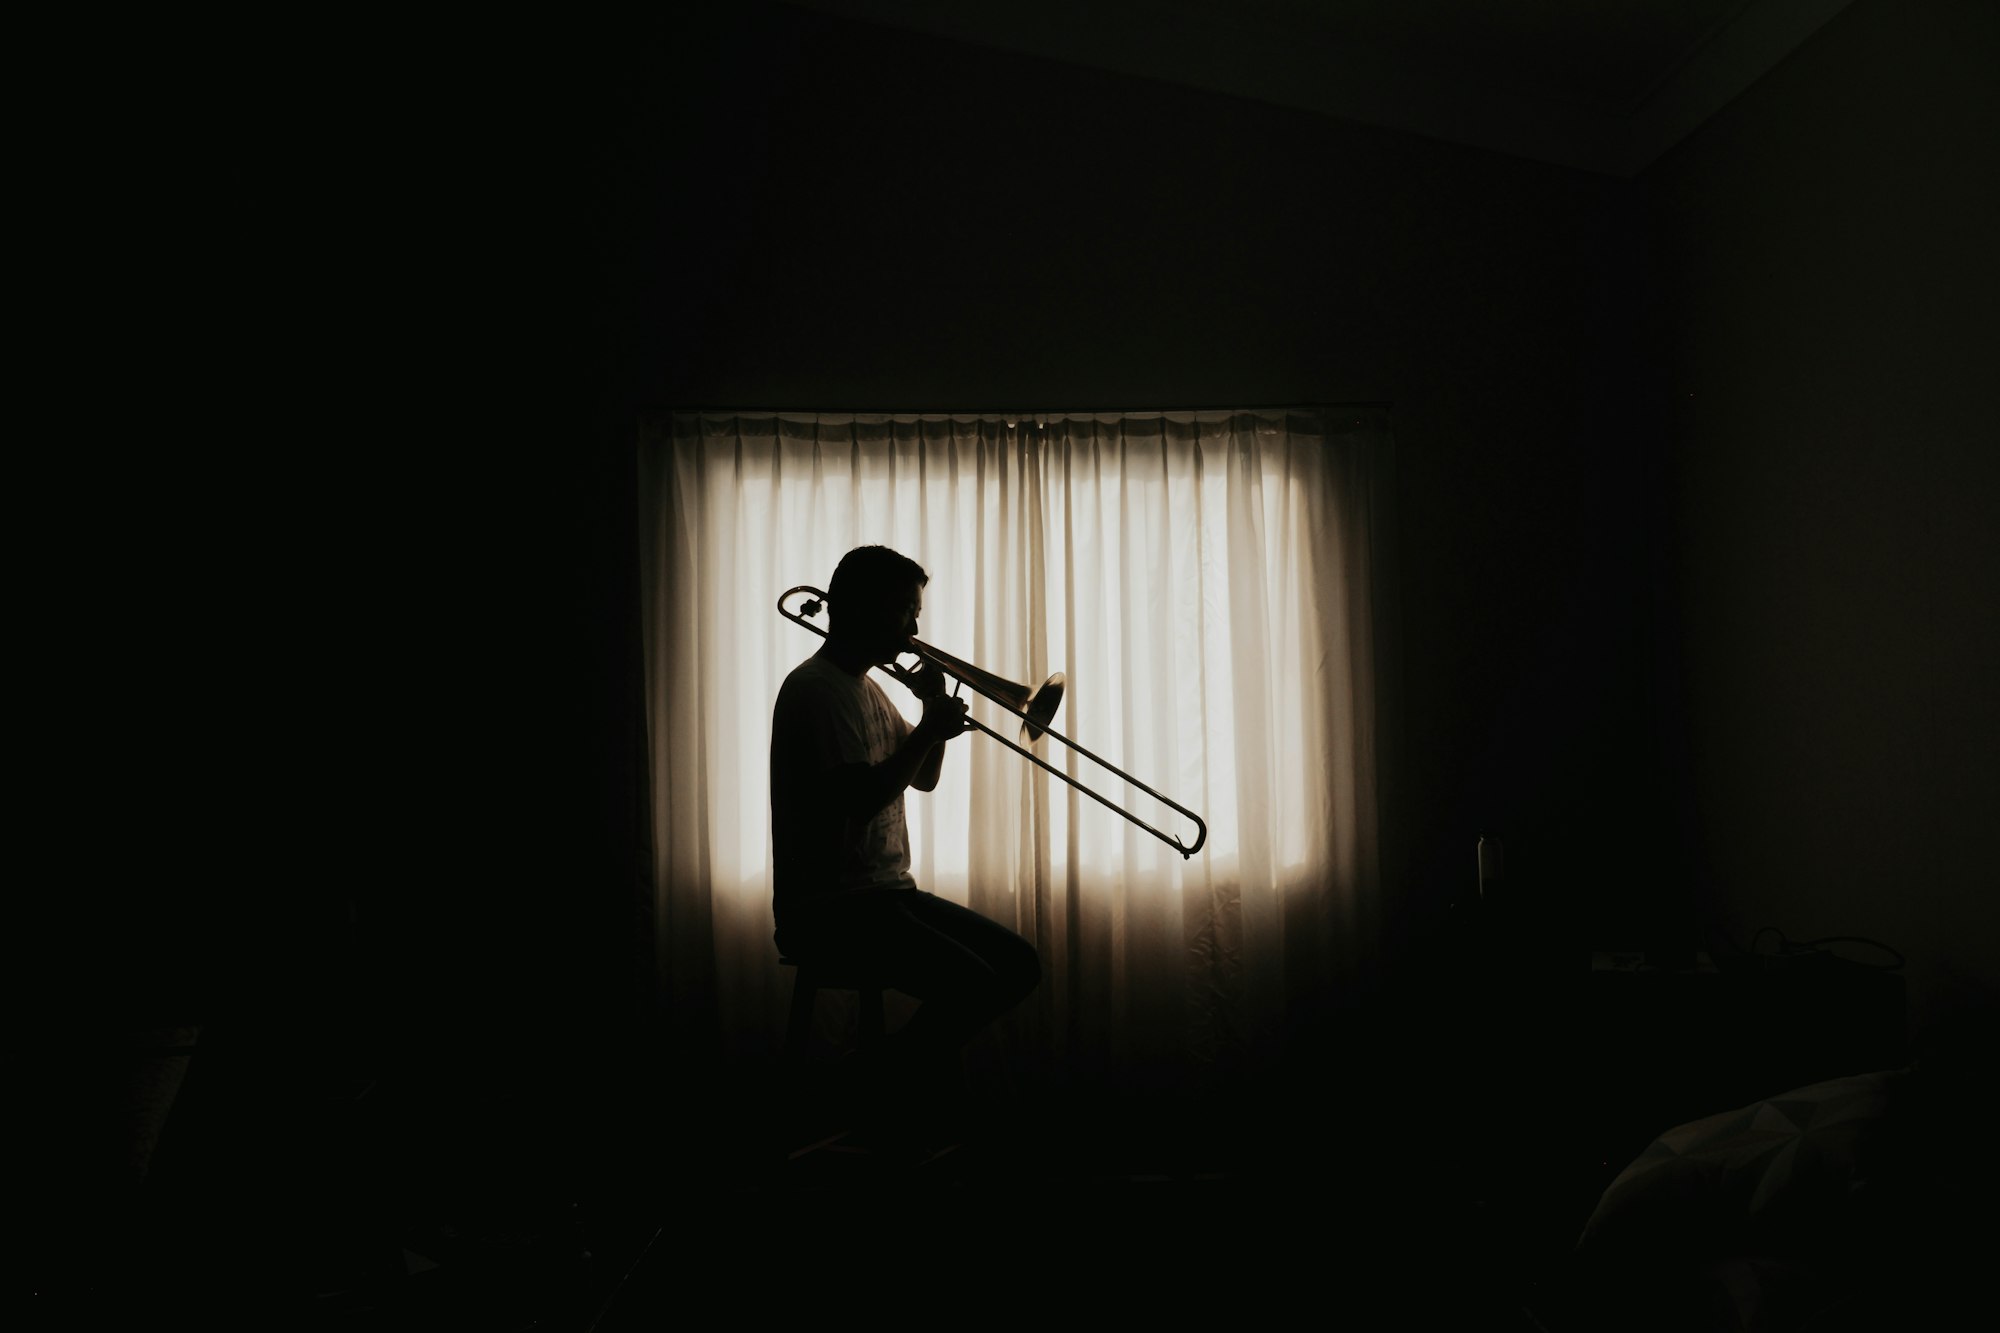 man playing wind instrumend inside room